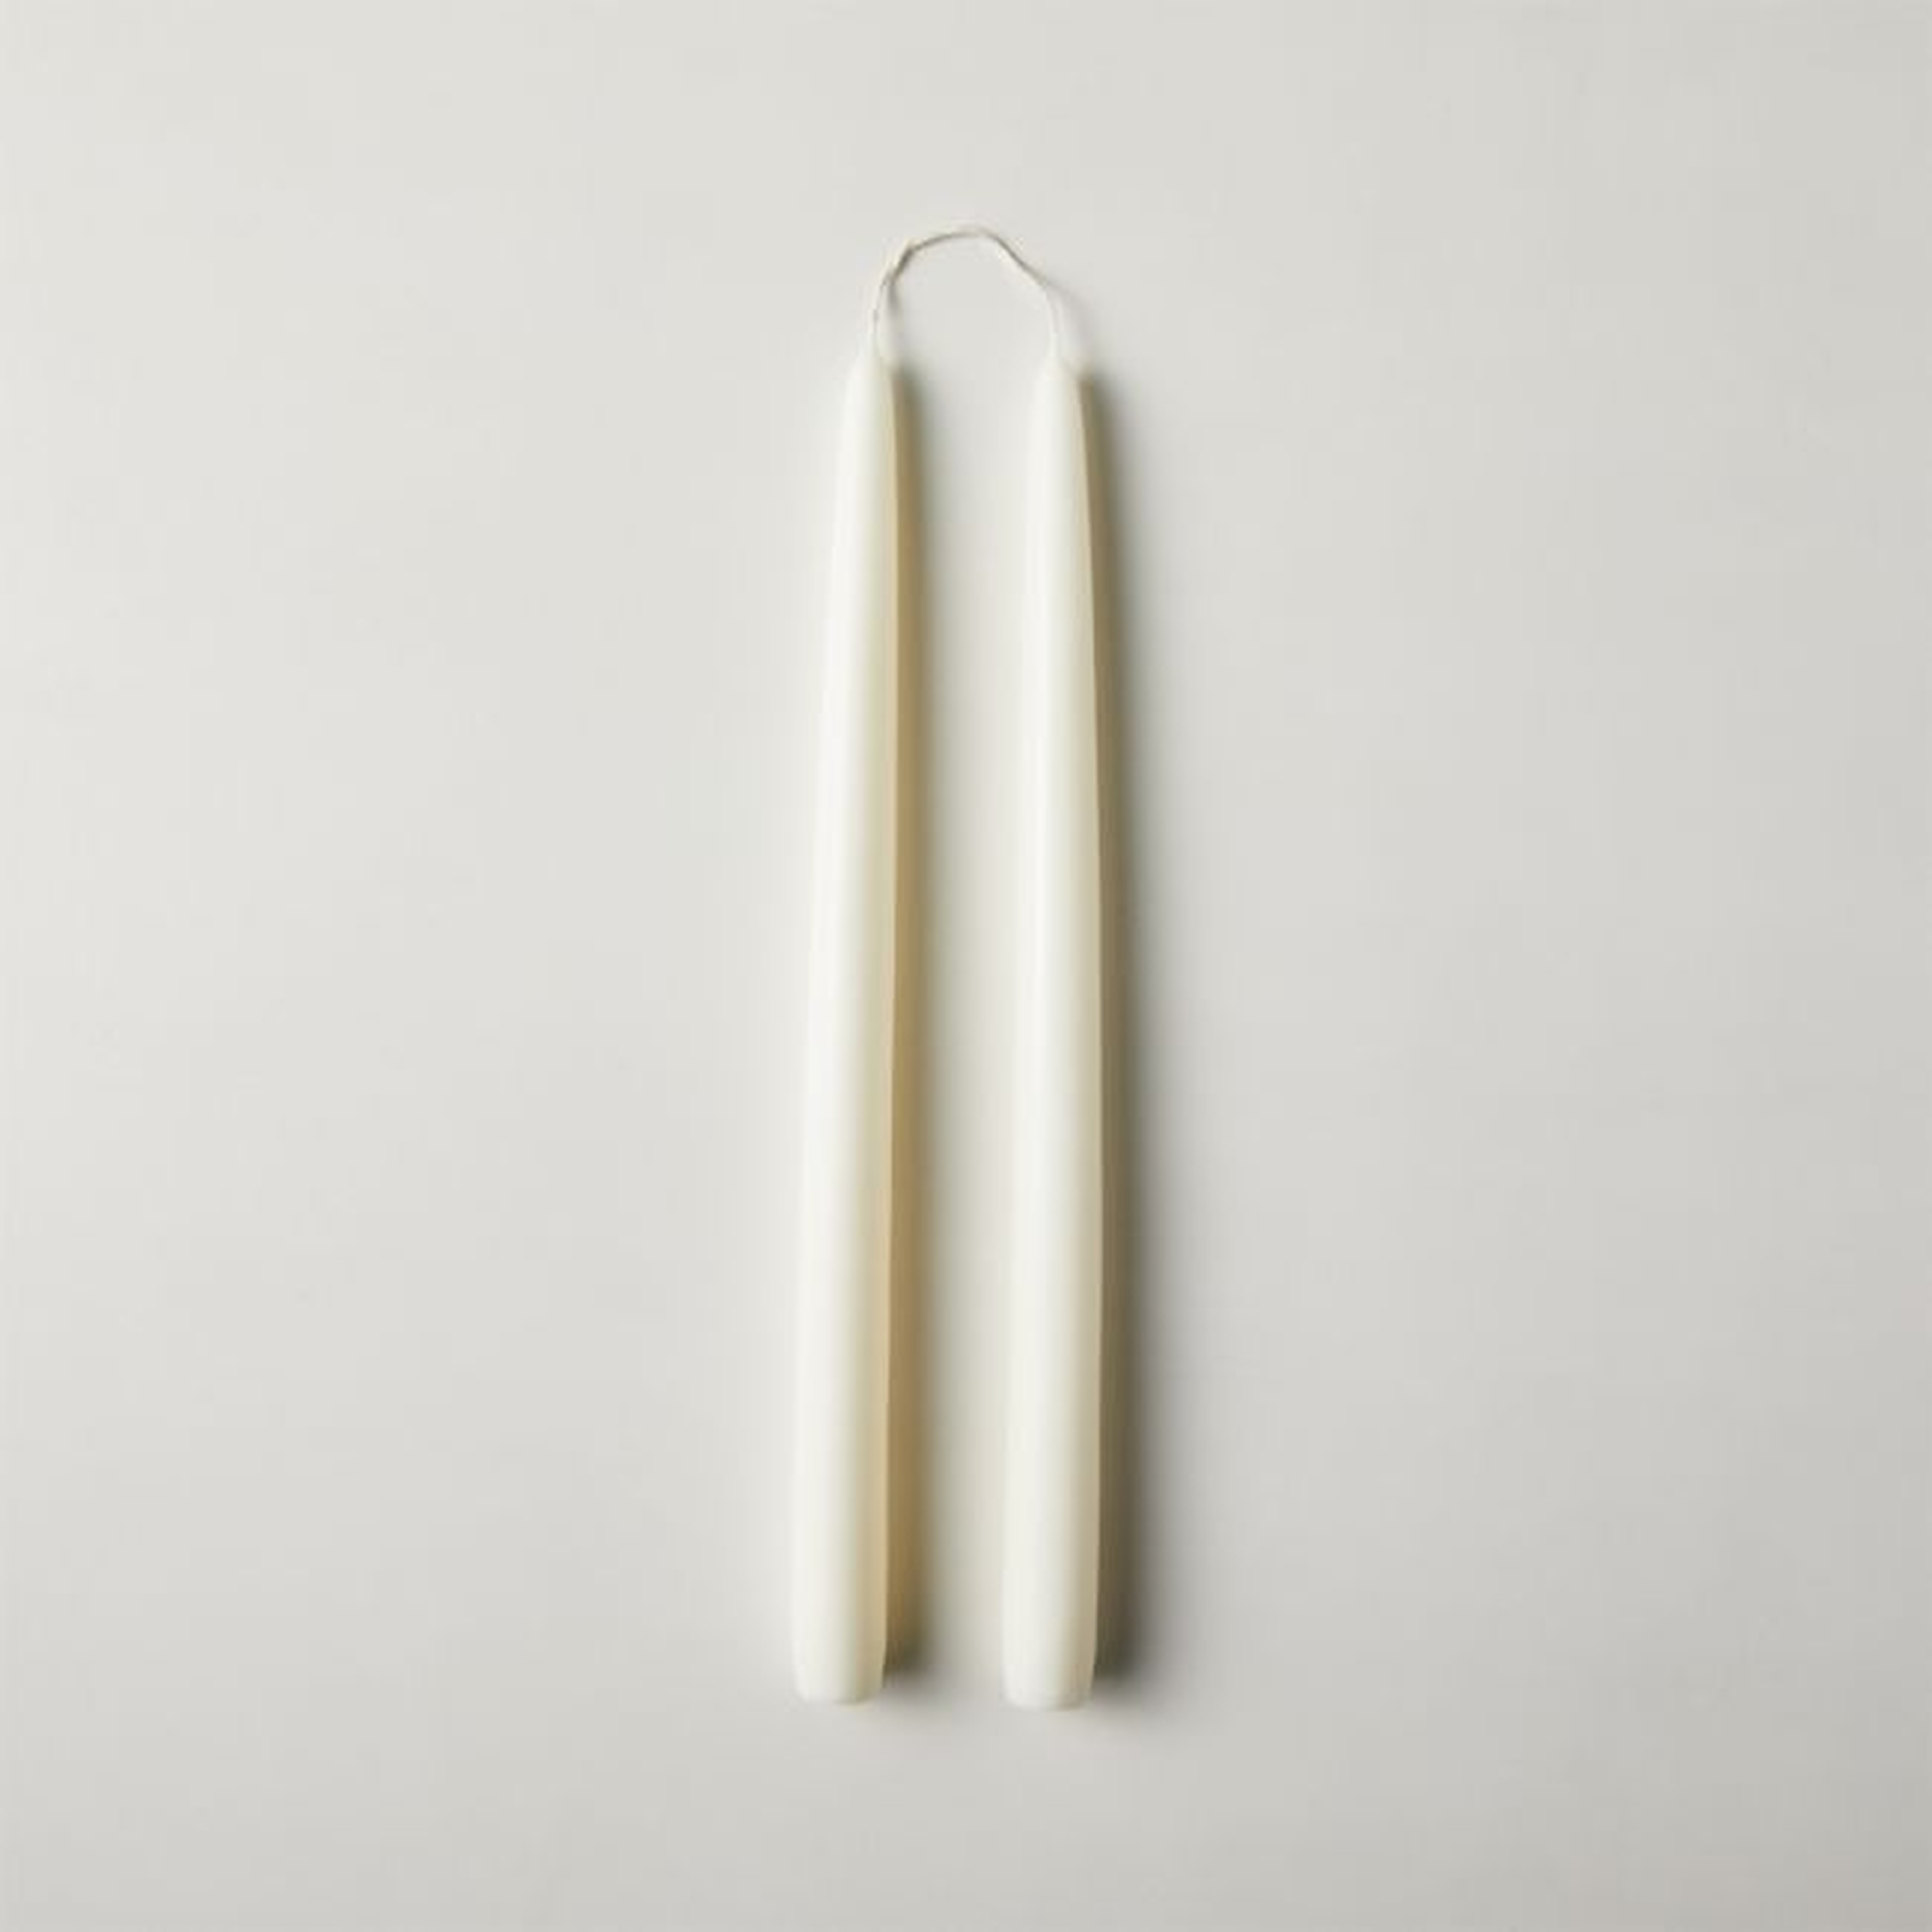 Warm White Taper Candle Set of 2 - CB2